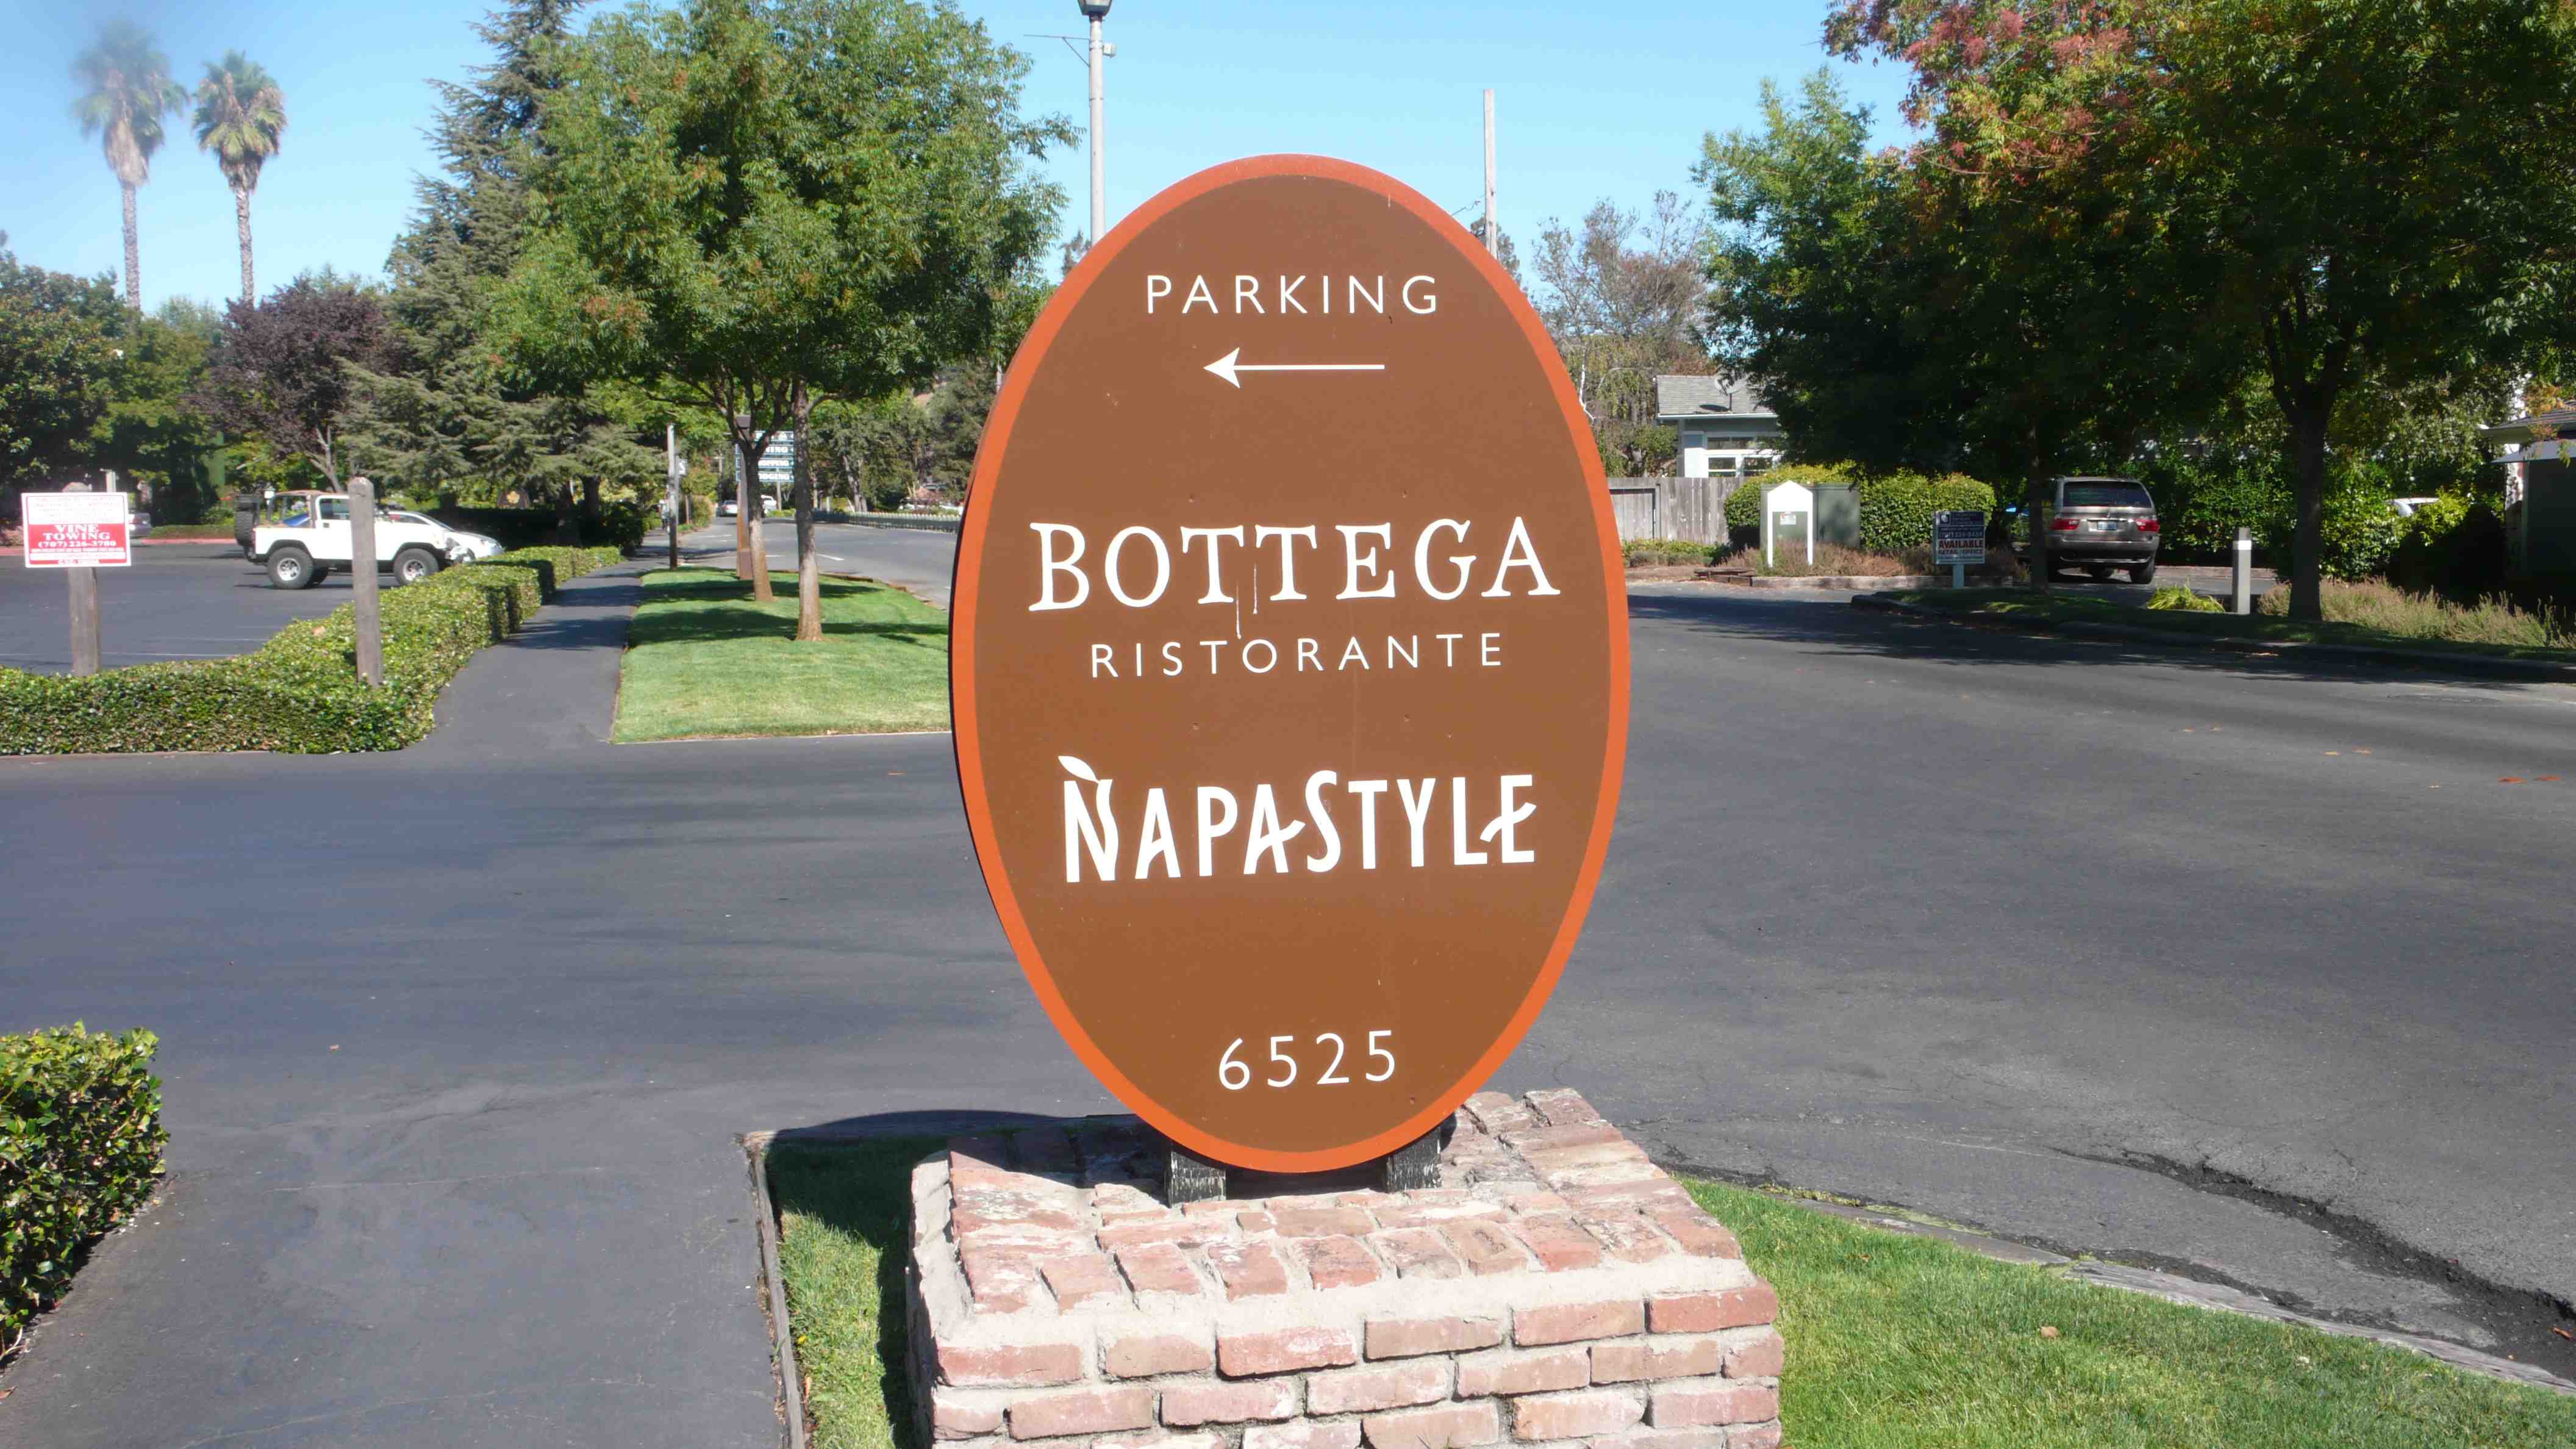 Bottega is housed in the Vintage 1870 Marketplace complex